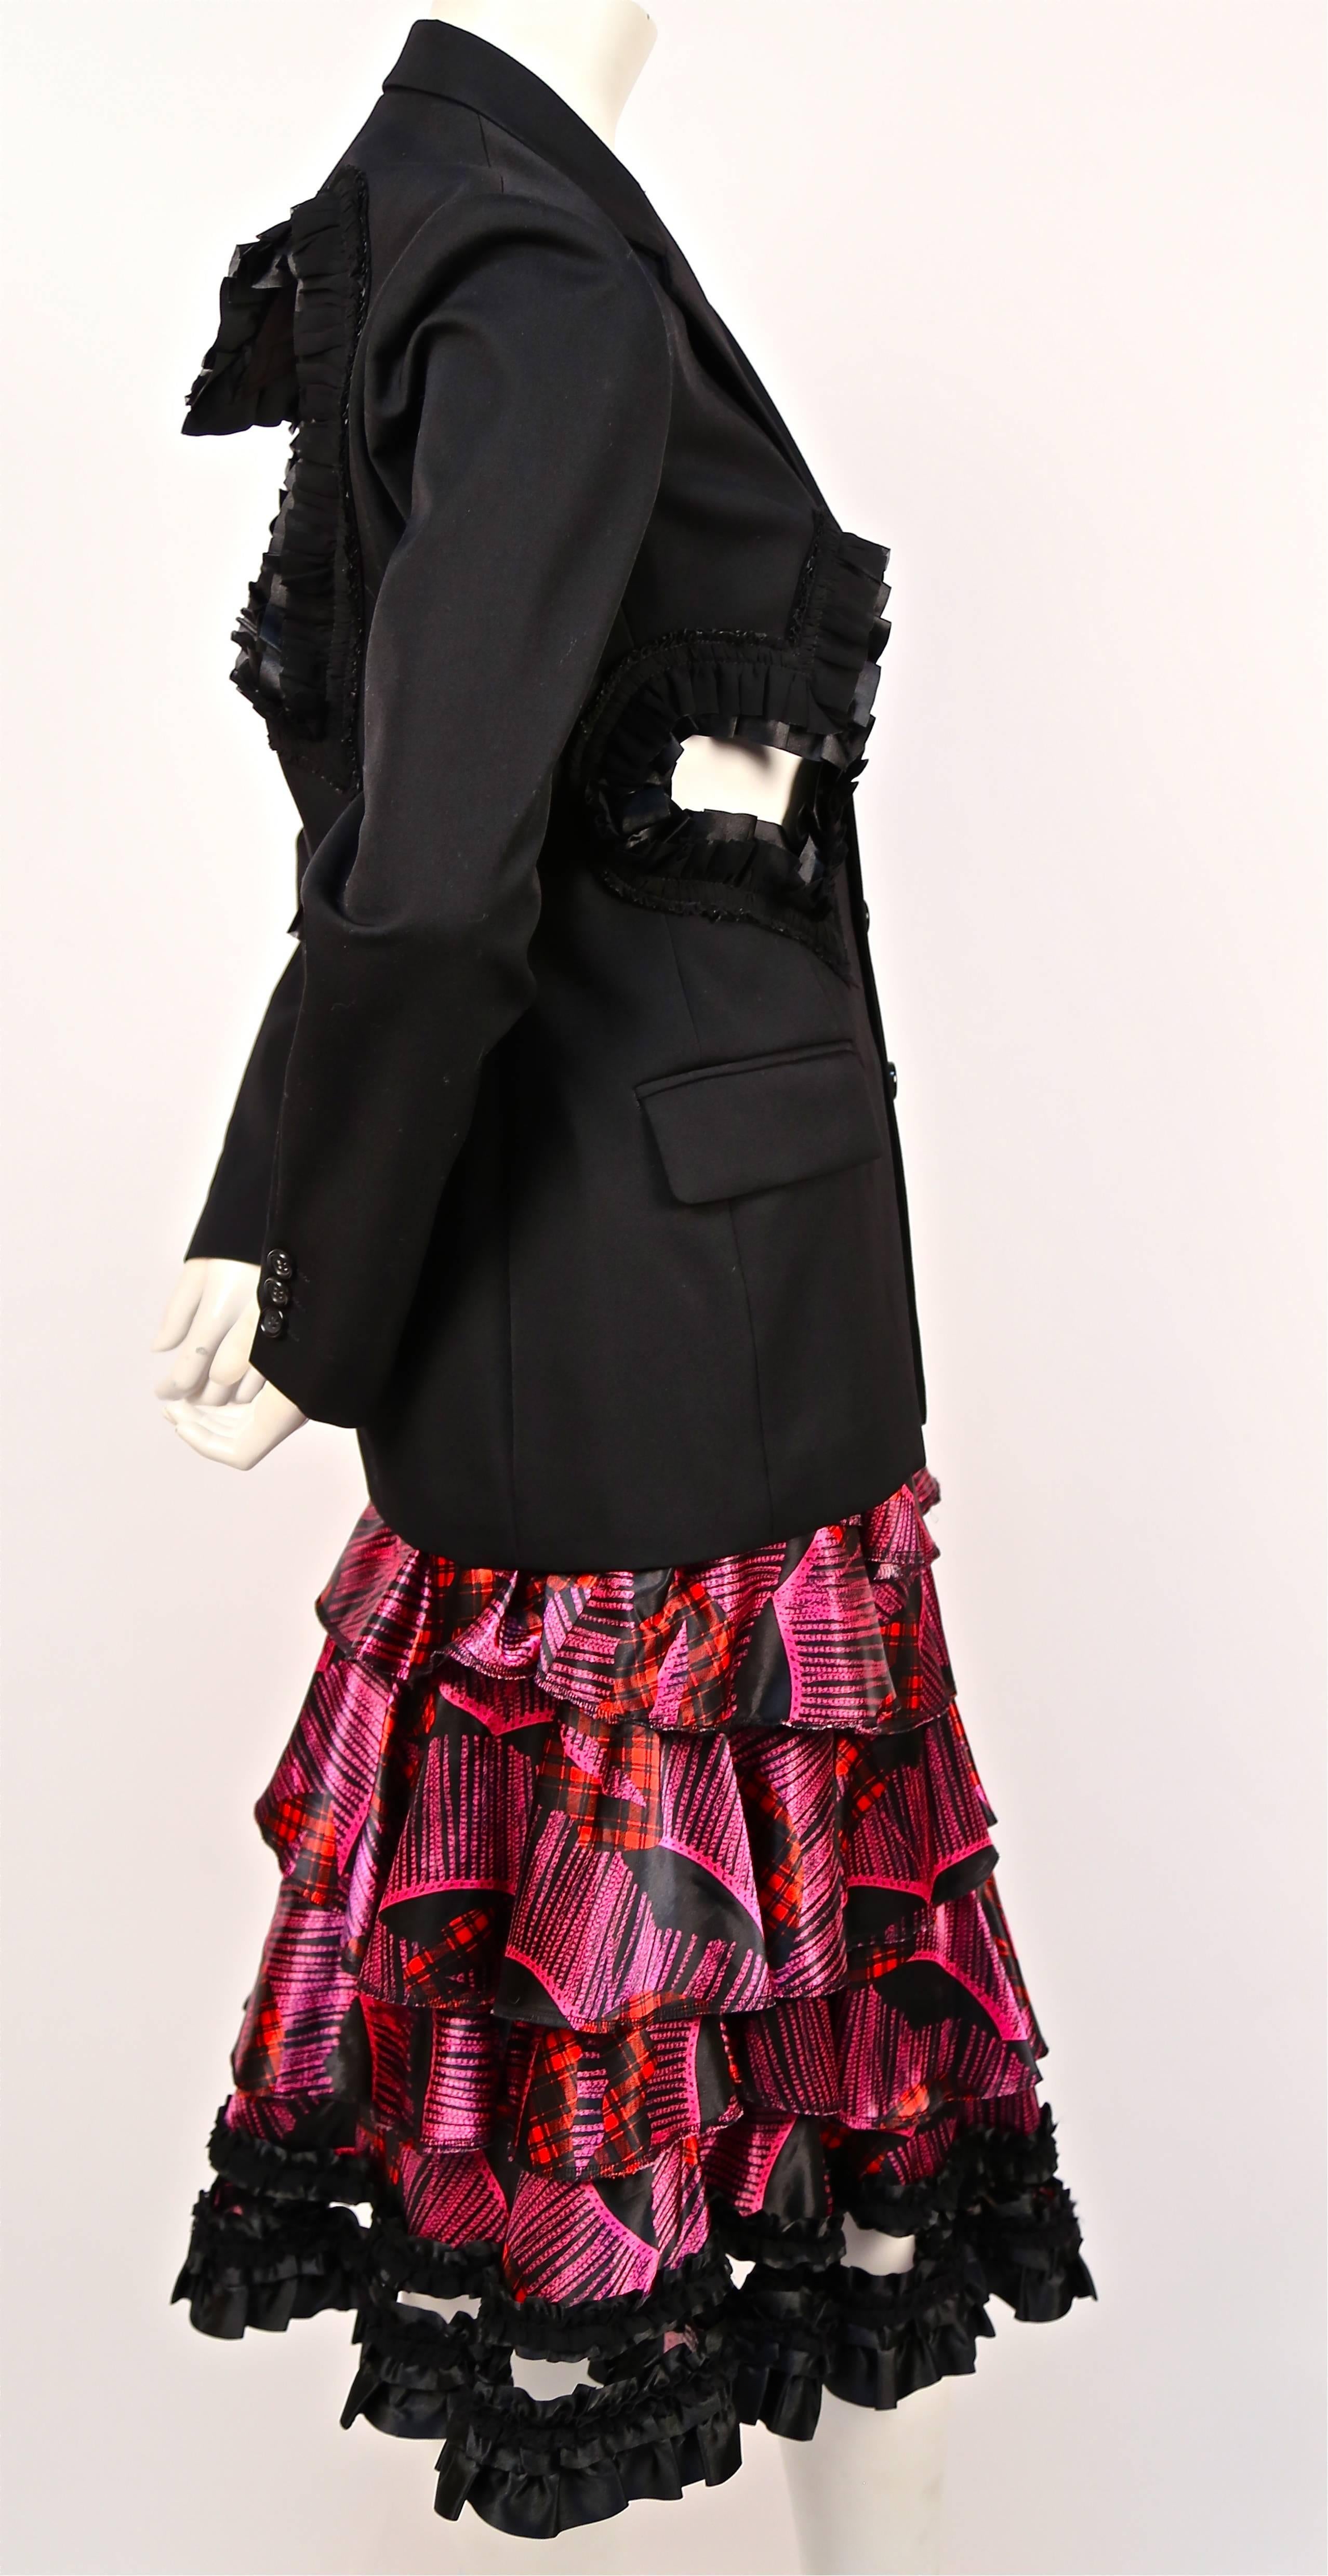 Very rare jet black blazer with cut out hearts and ribbon trim paired with a printed tiered skirt by Comme Des Garcons as seen at the 'Bad taste' fall 2008 runway show. Both pieces are labeled a size 'S'. Jacket measures approximately: 15" at